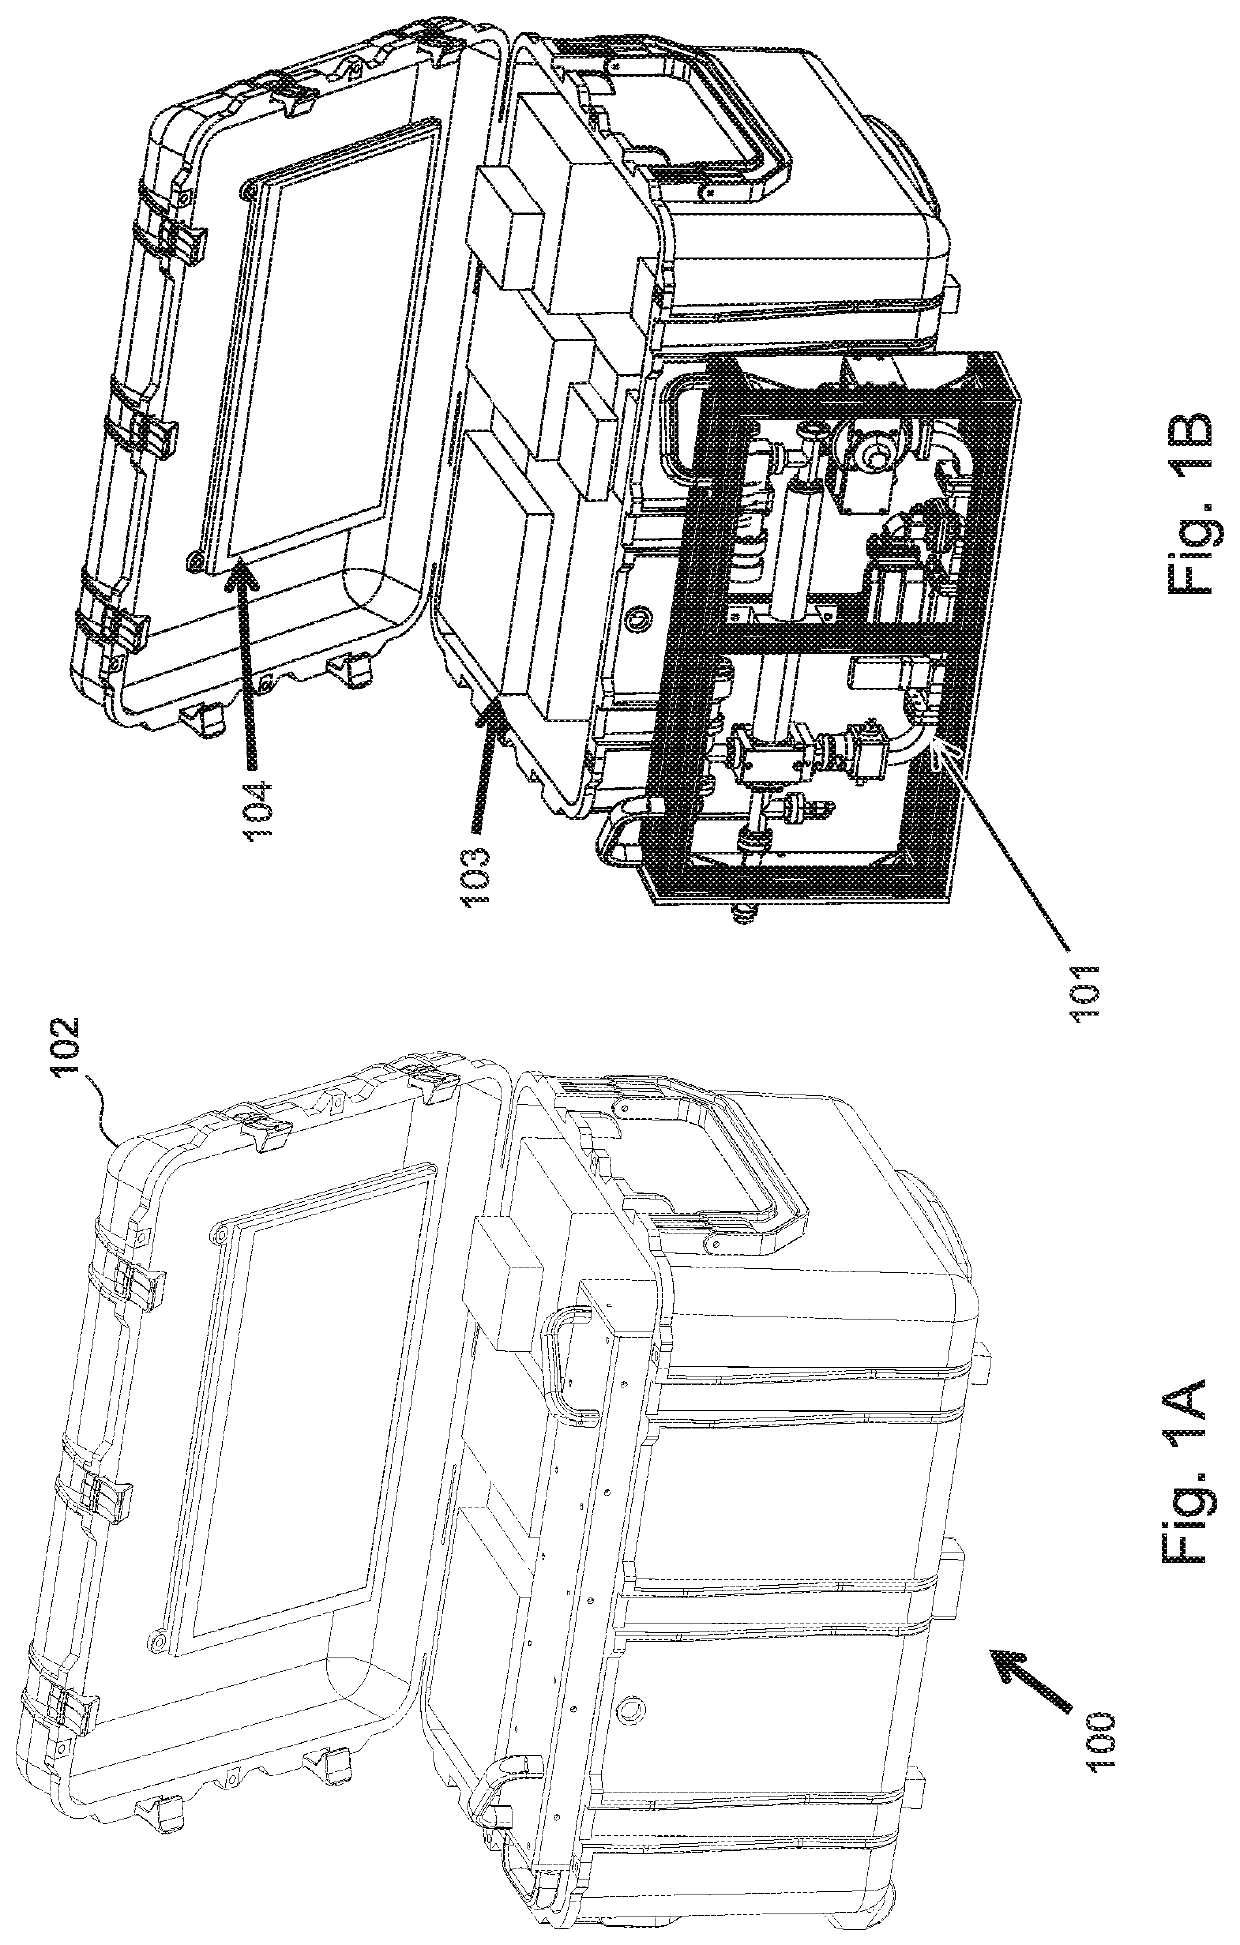 Portable accelerator based X-ray source for active interrogation systems